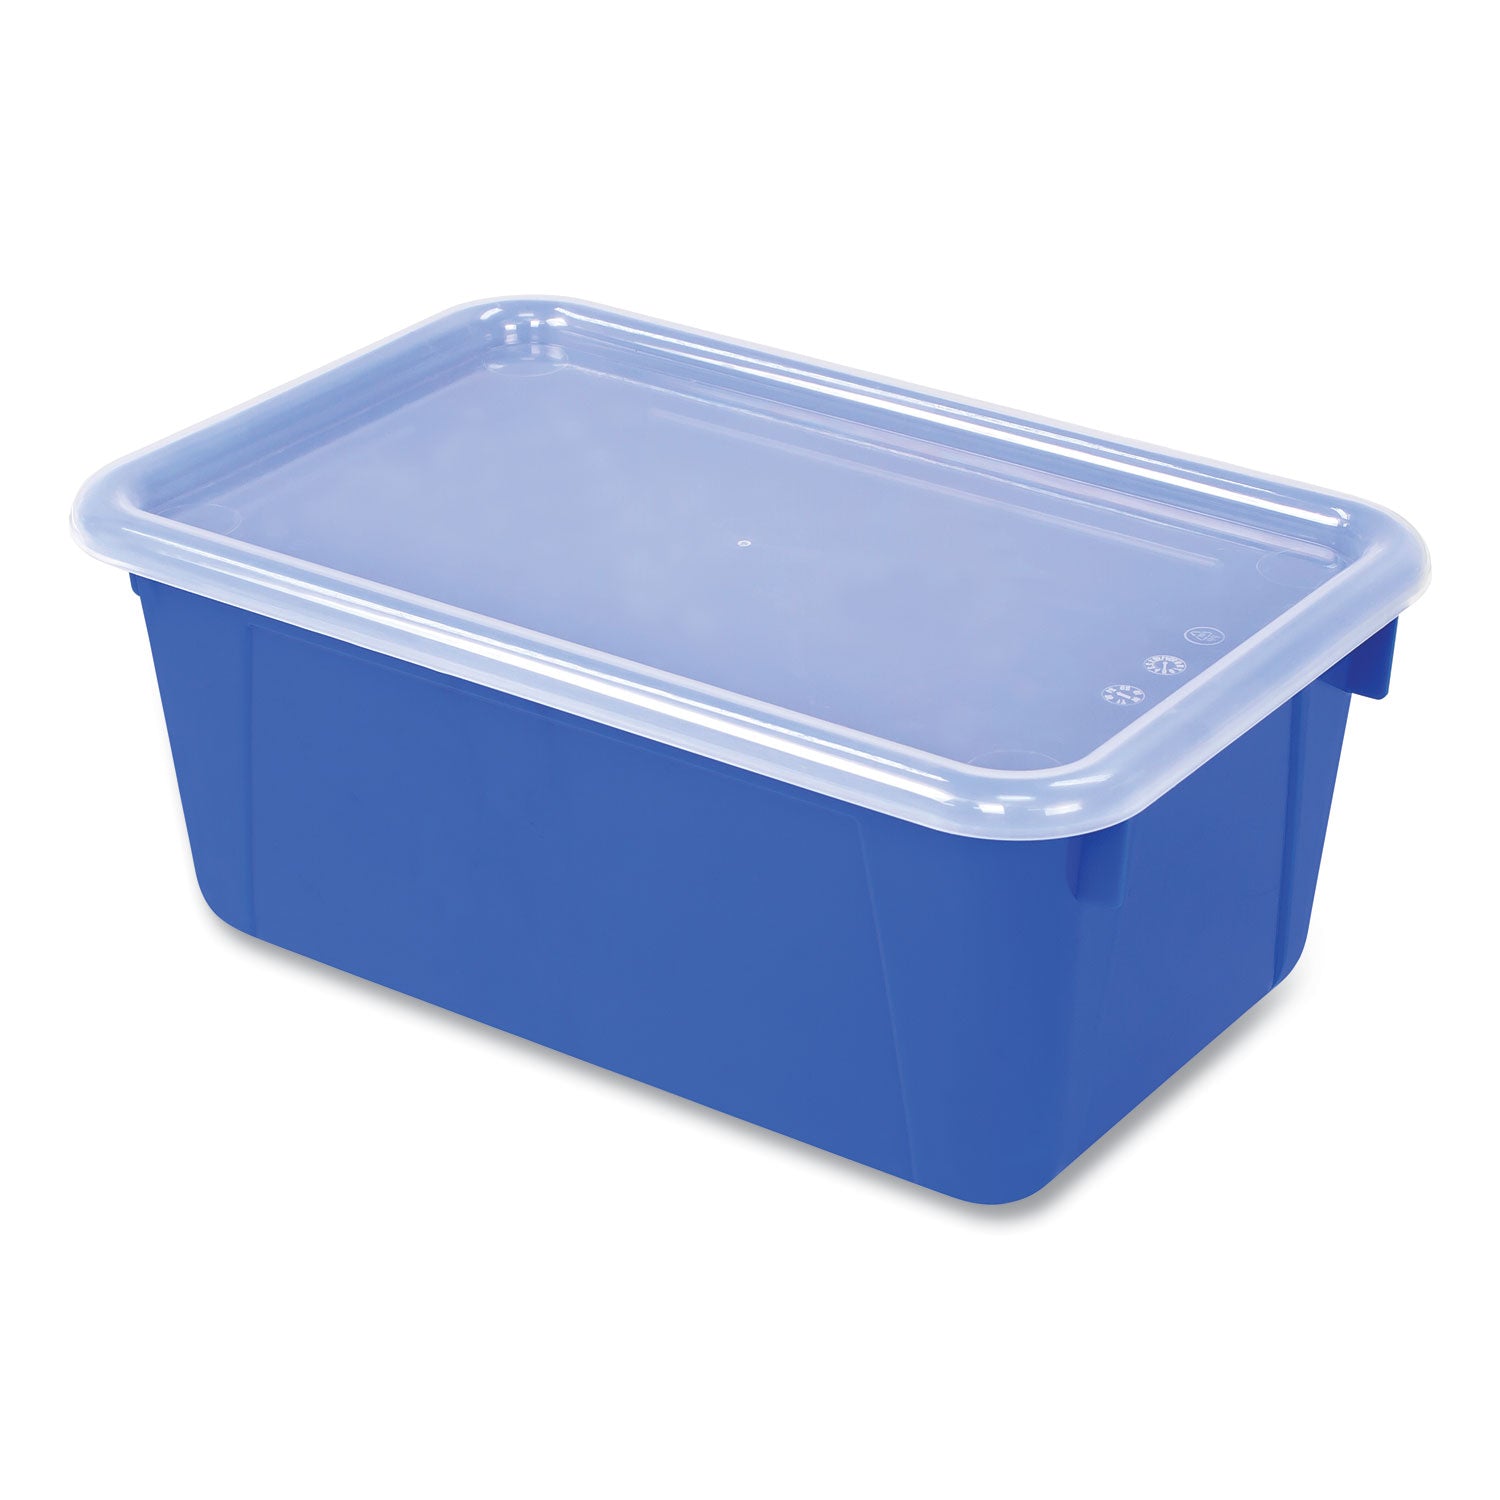 cubby-bin-with-lid-1-section-2-gal-82-x-125-x-115-blue-5-pack_stx62408u05c - 1